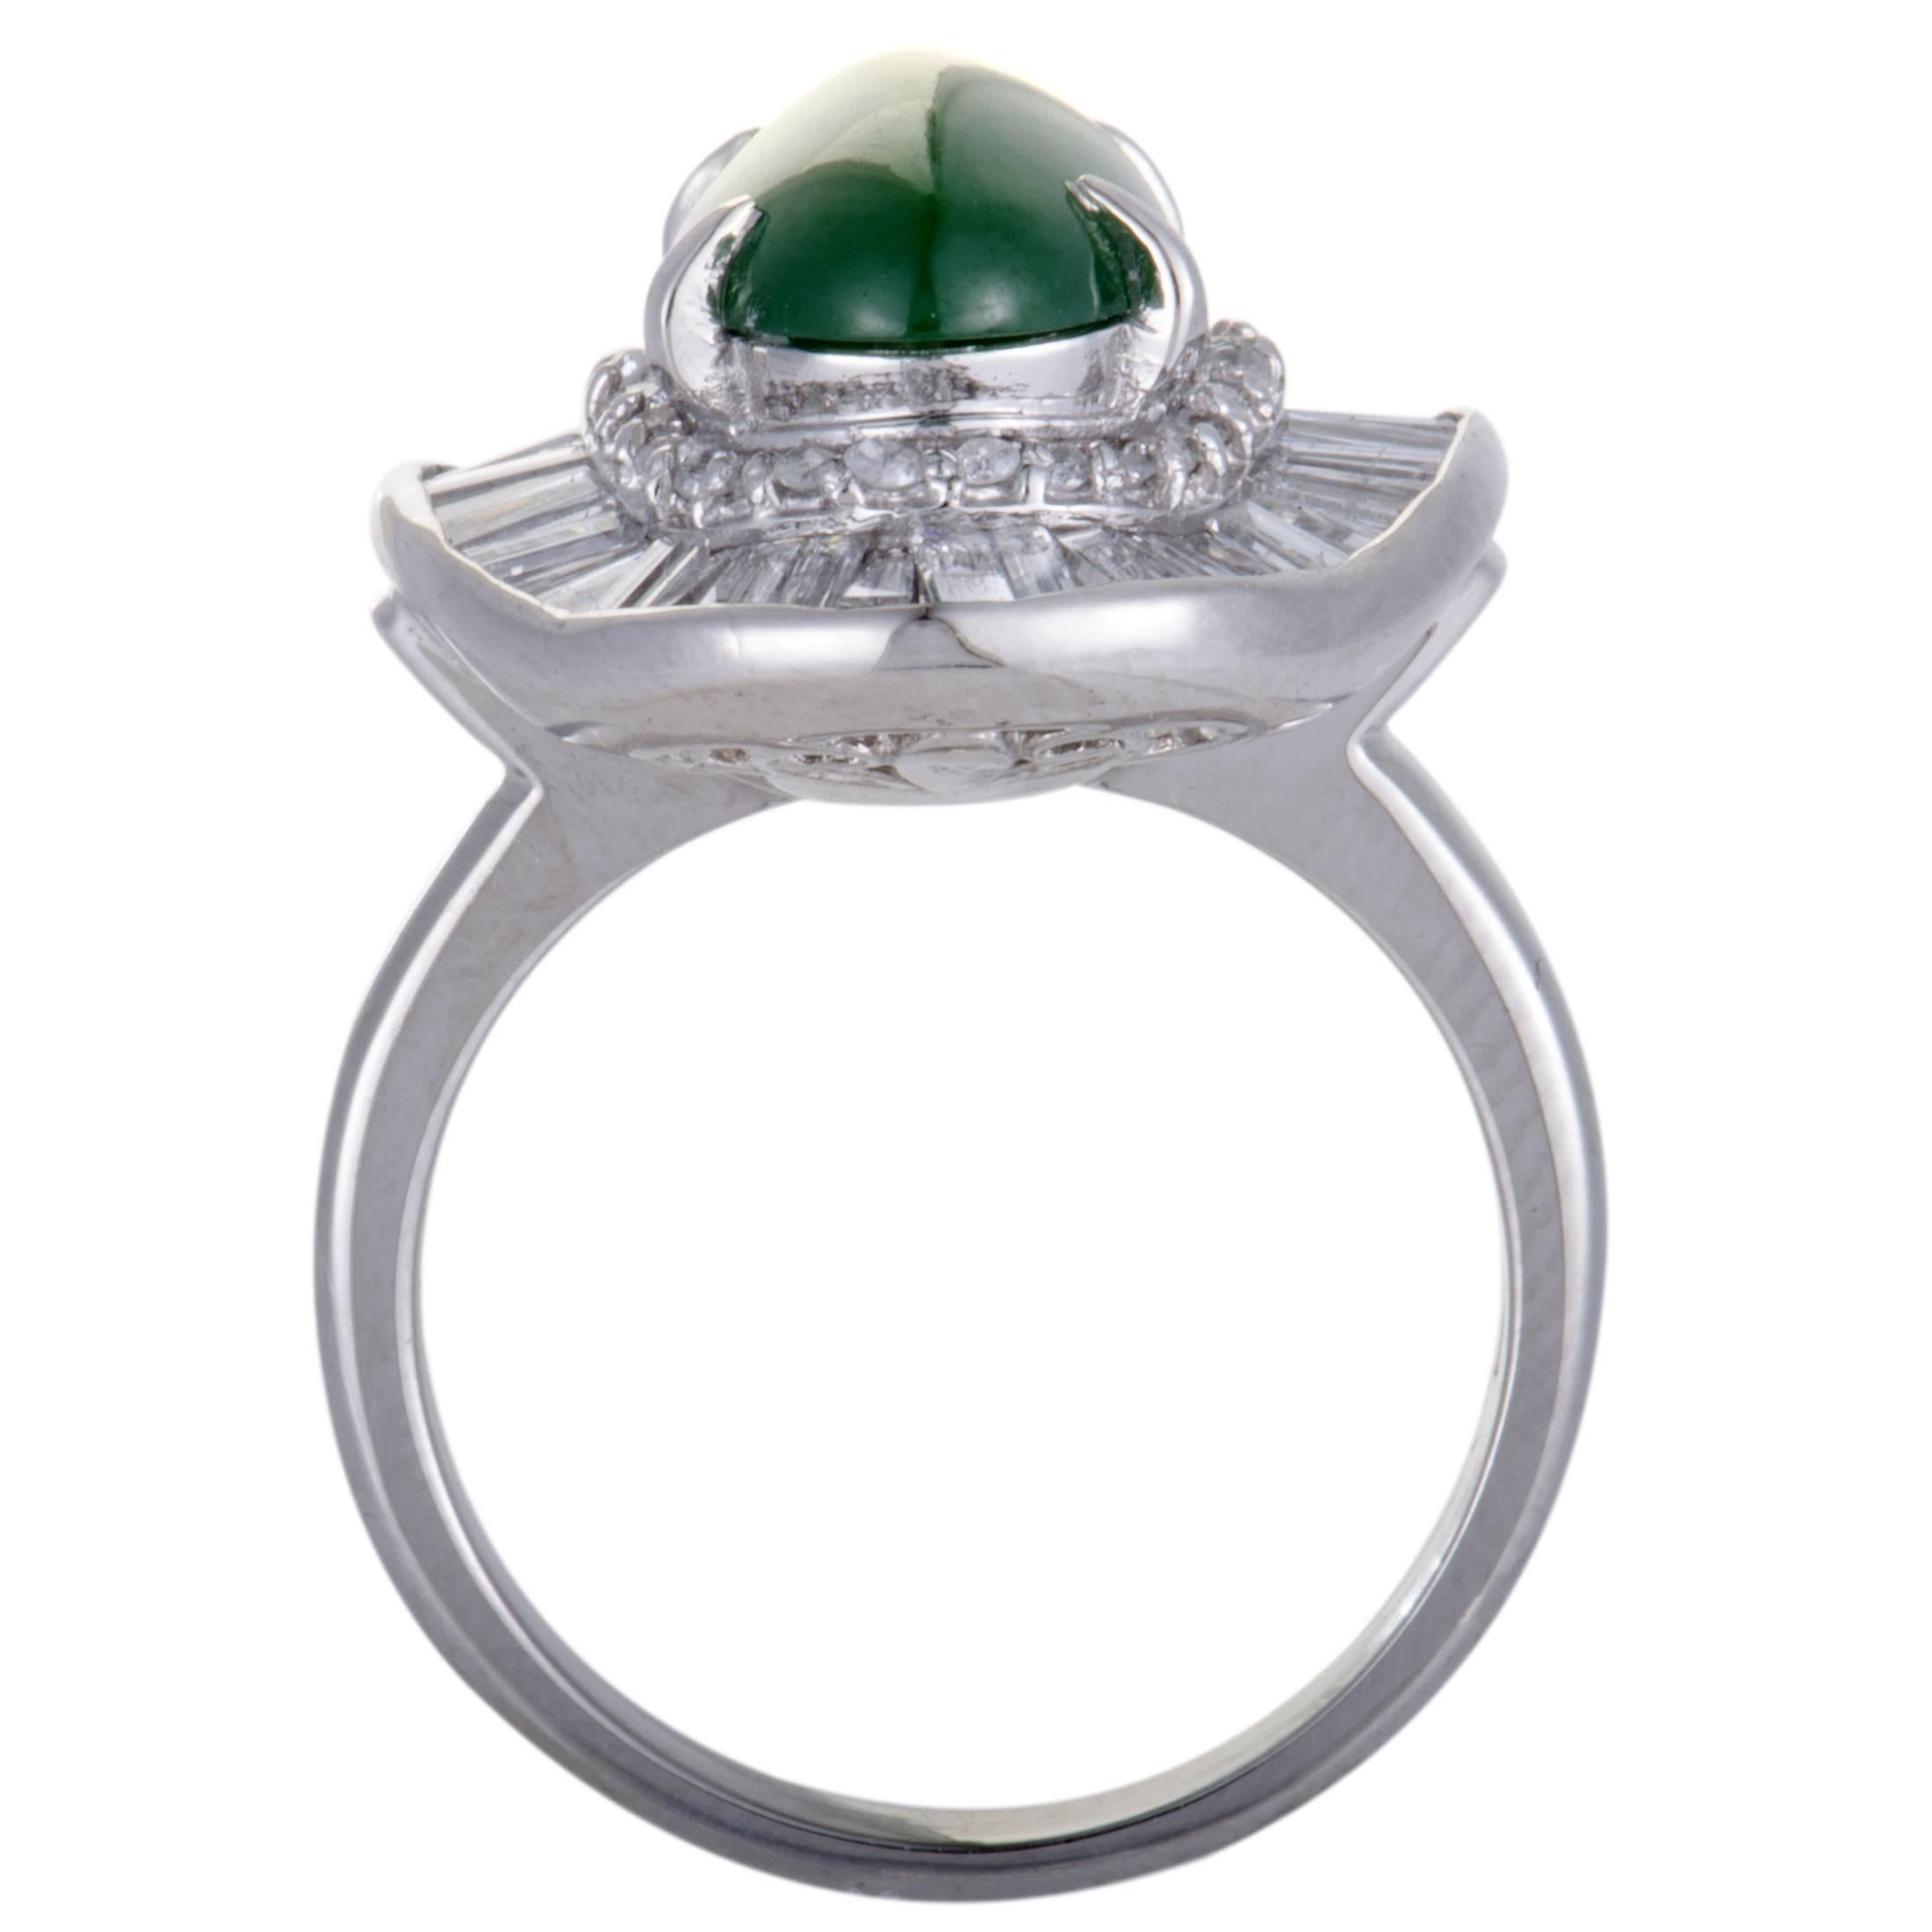 Beautifully crafted in shimmering platinum, this gorgeous ring is absolutely exemplary in design and style. The stunning ring has an exquisite pave of dazzling 1.55ct diamonds surrounding a stunning green jade stone of 3.42ct that accentuates the